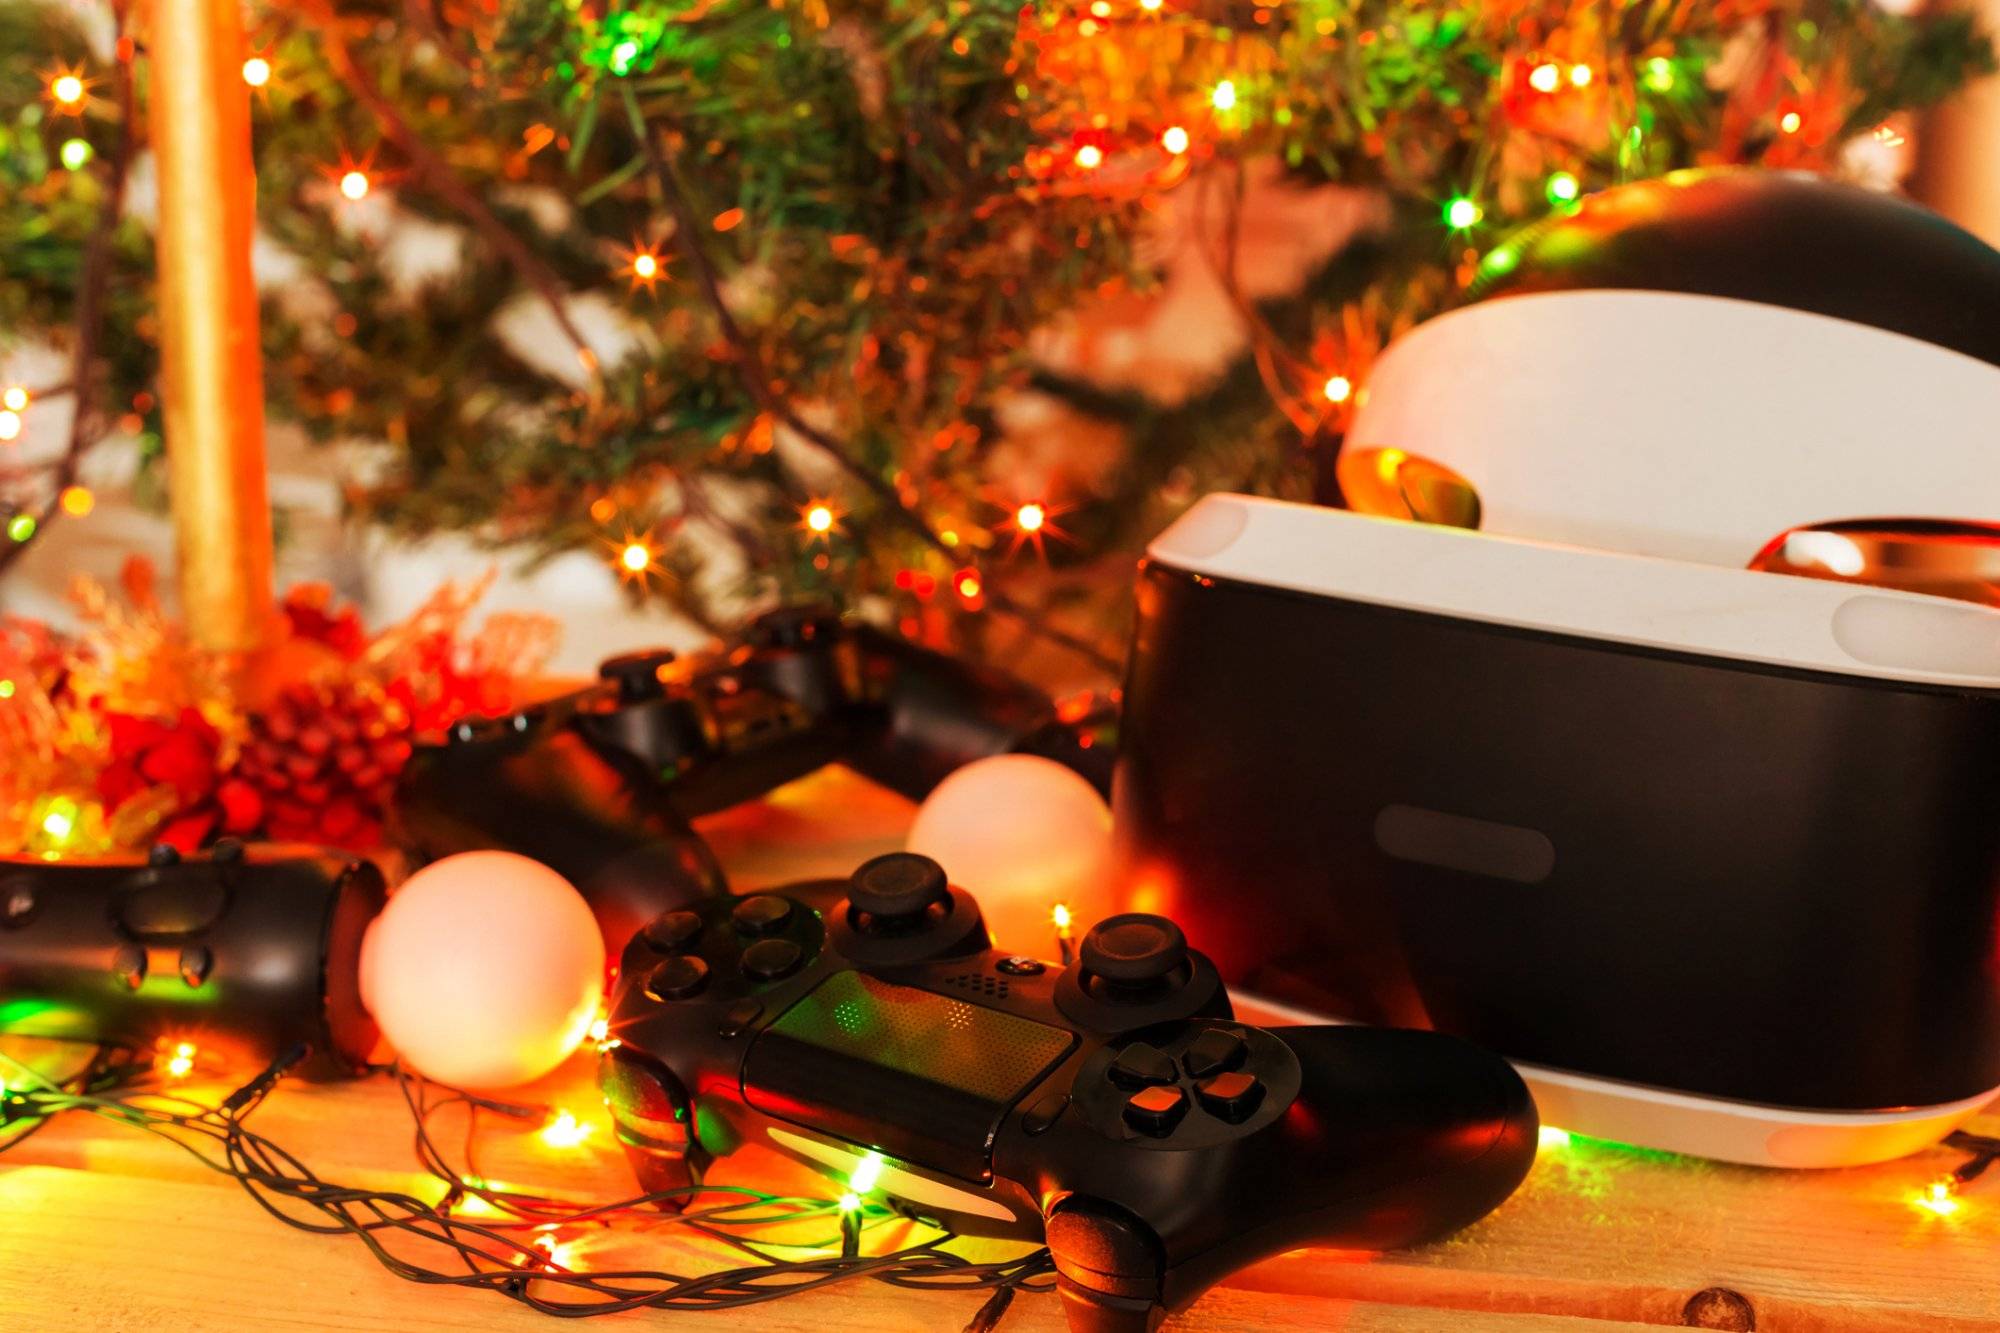 A gift for Christmas, New Year, St. Valentine's Day. A game console as a gift. Soft Focus